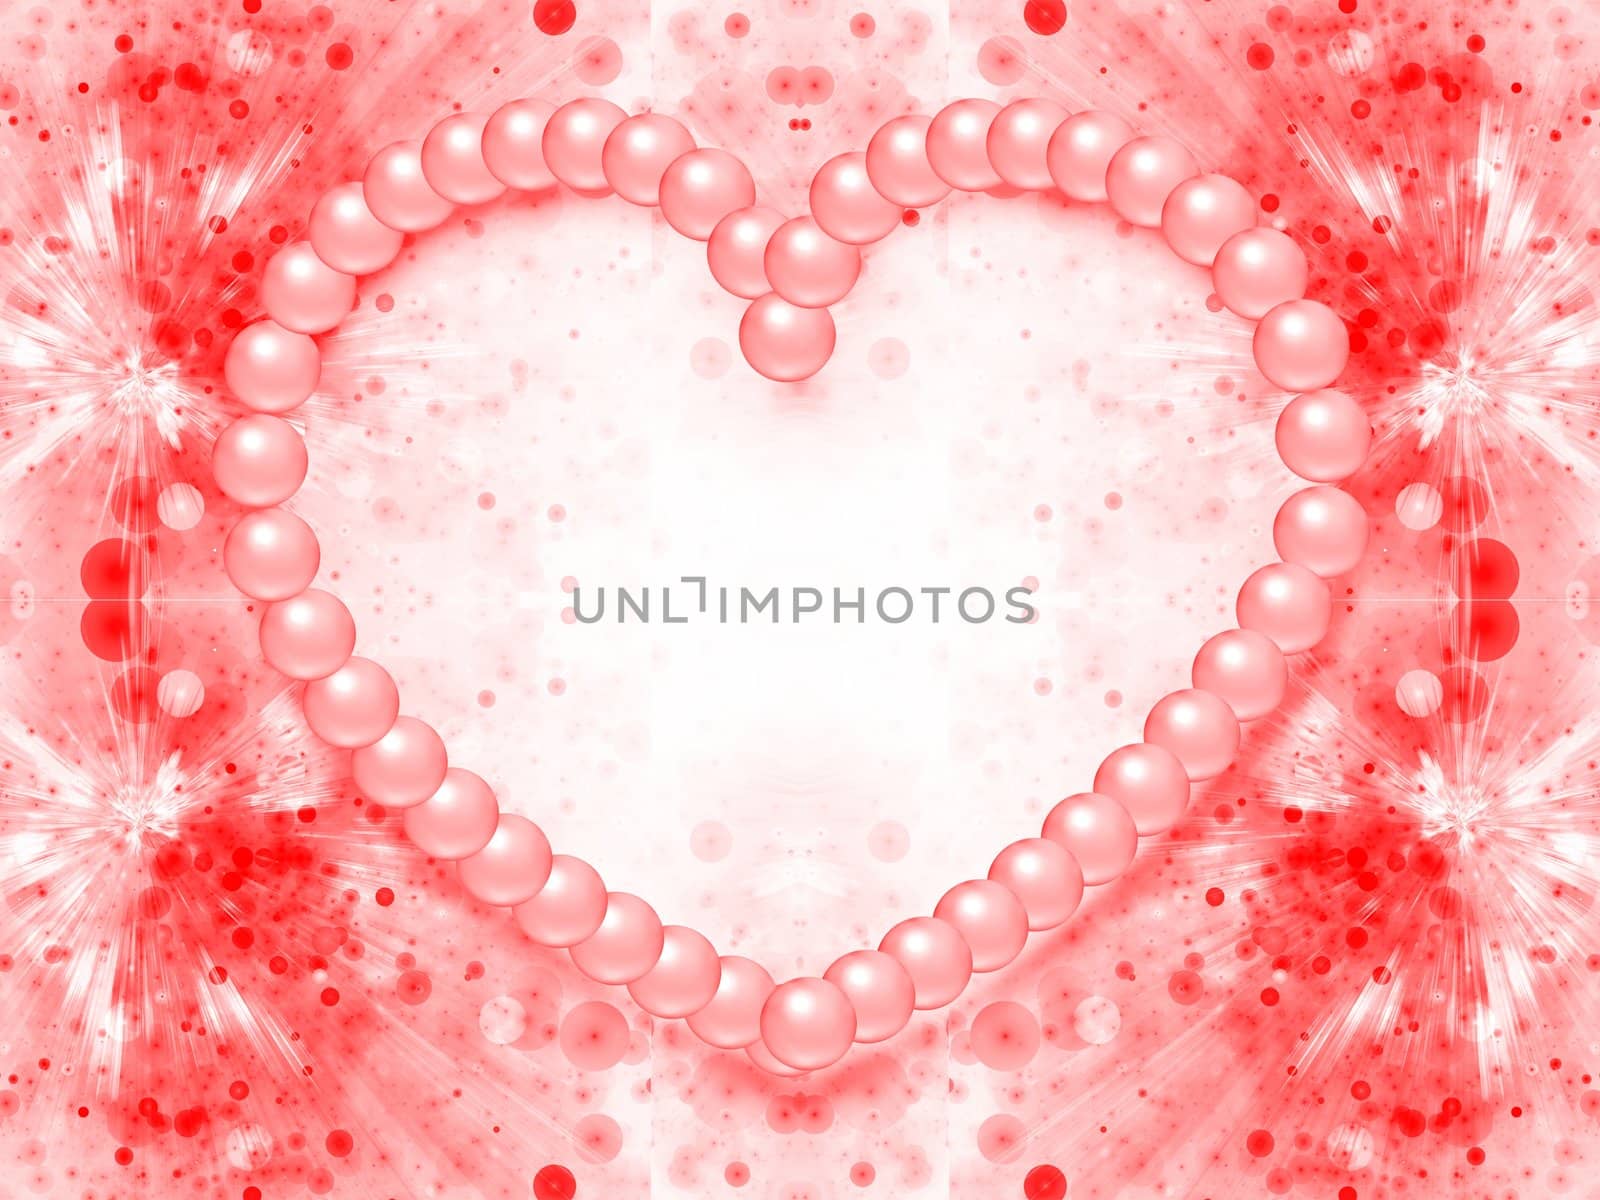 design of valentine day background with heart shape made from pearls